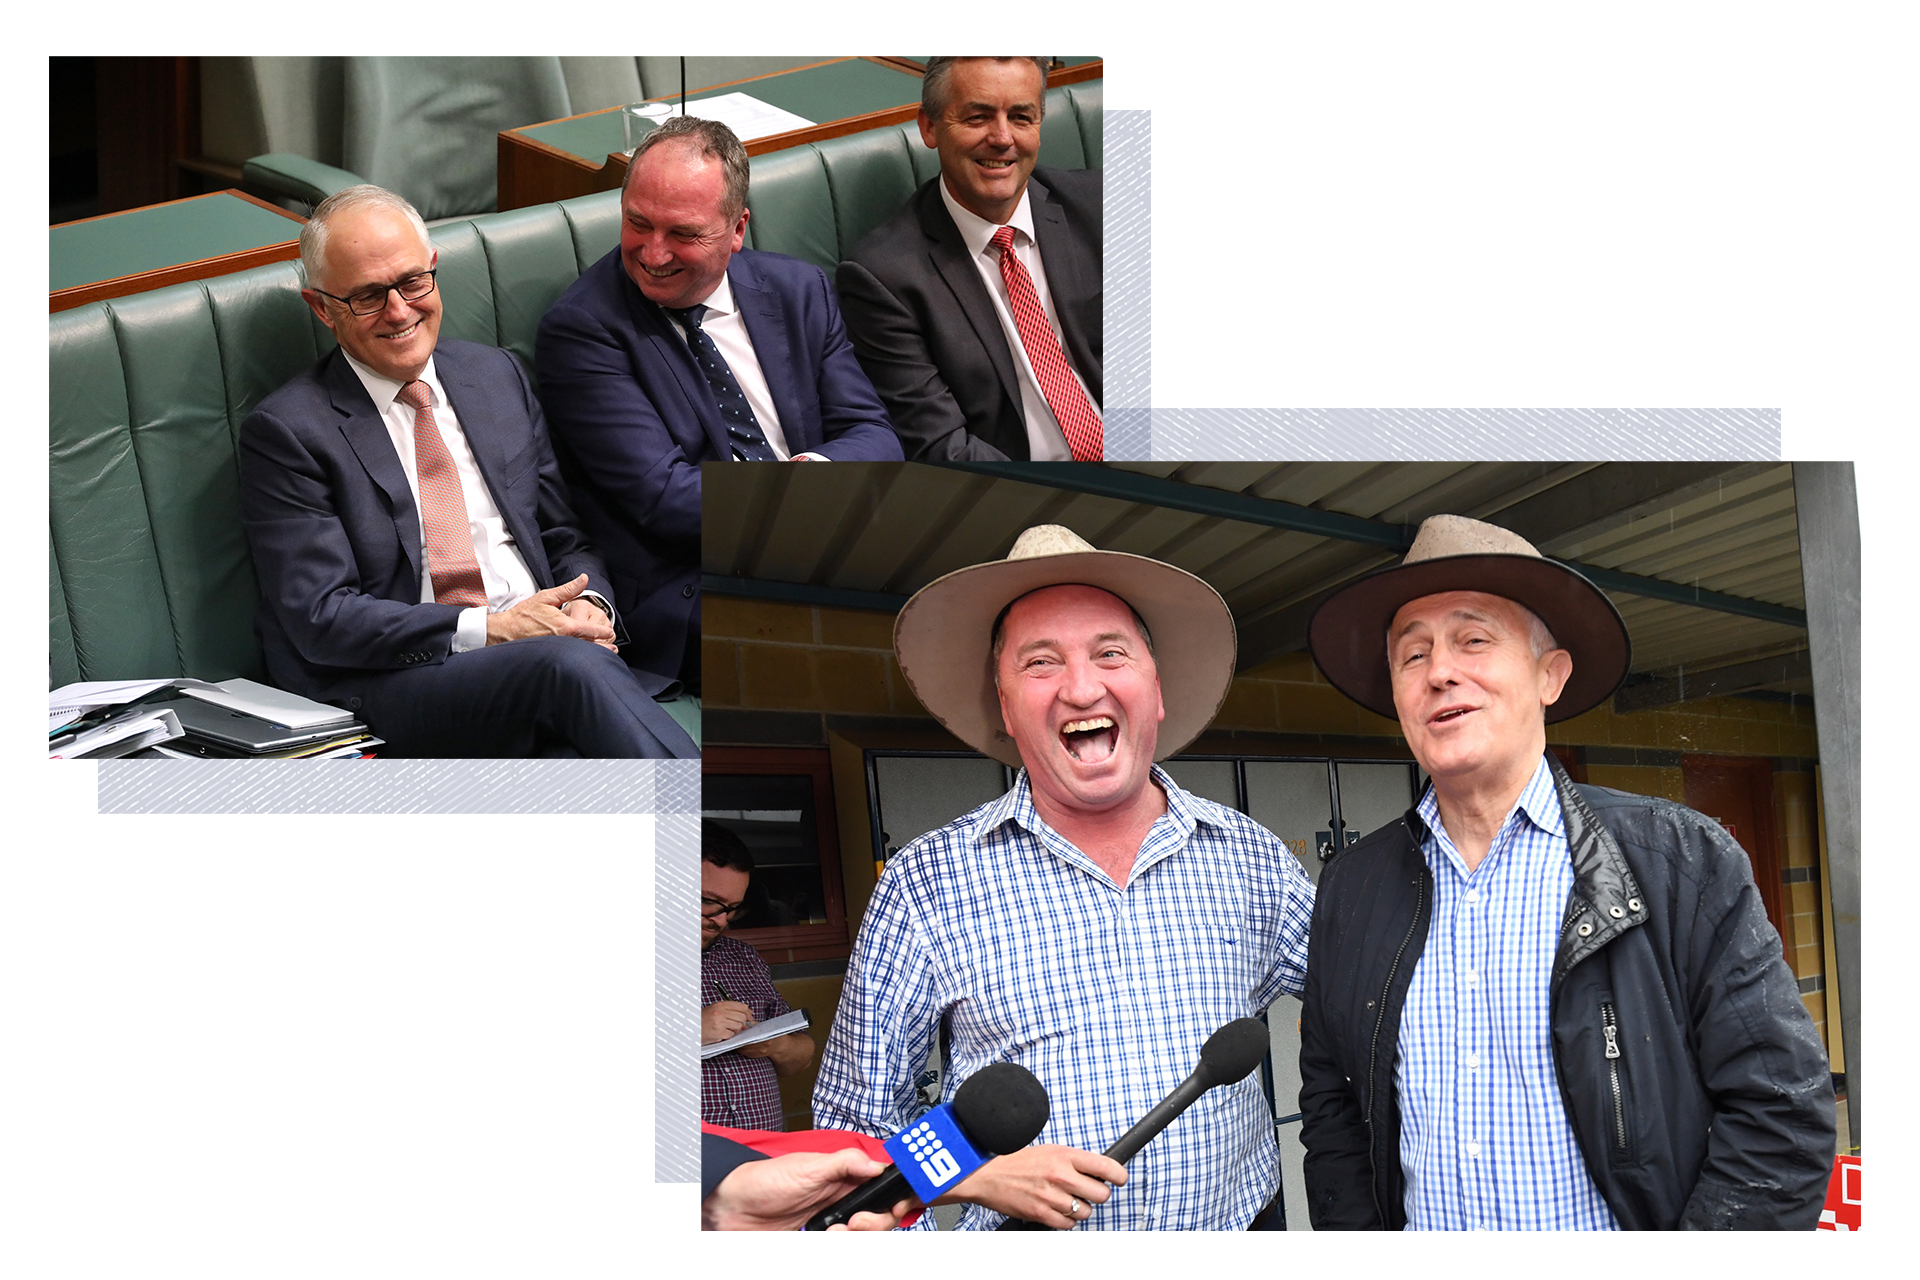 Malcolm Turnbull and Barnaby Joyce smiling while sitting together in parliament, and while campaigning together. 